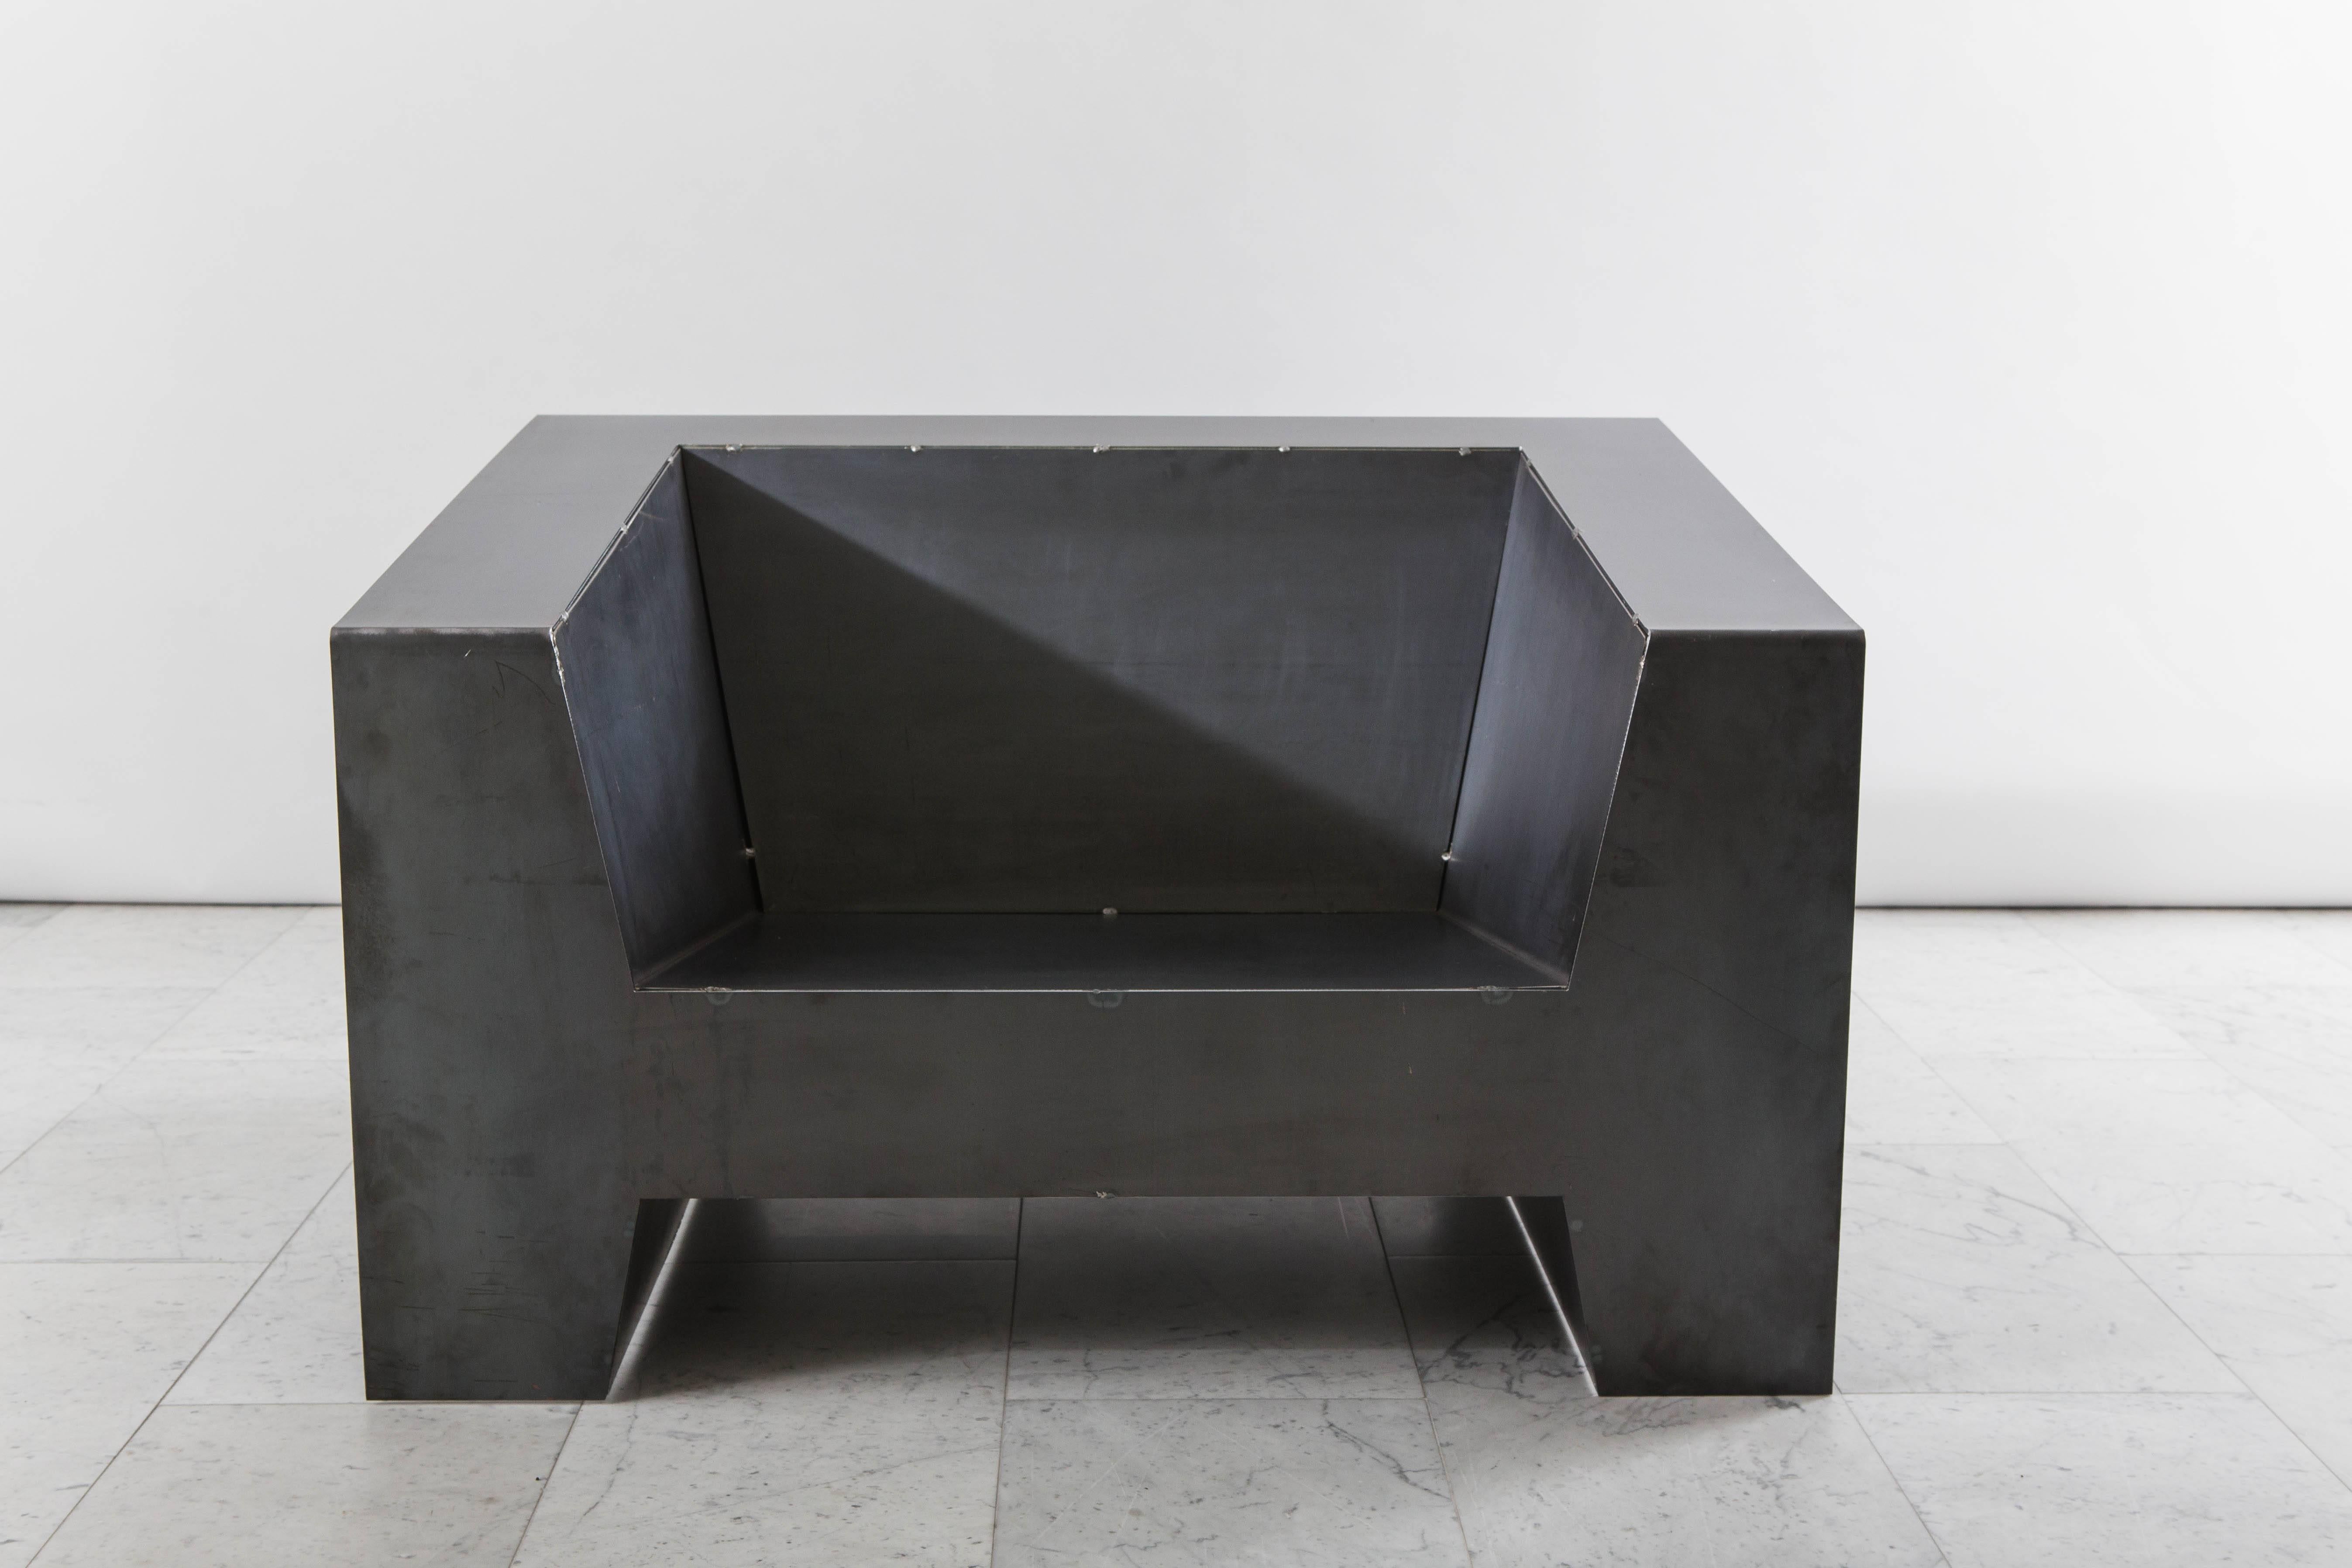 Todd Merrill studio represents the unique seating by Chris Rucker, innovatively made from recycled construction materials. Challenging everyday transient objects, the low club chair is made of construction mild steel with black wax. As it is